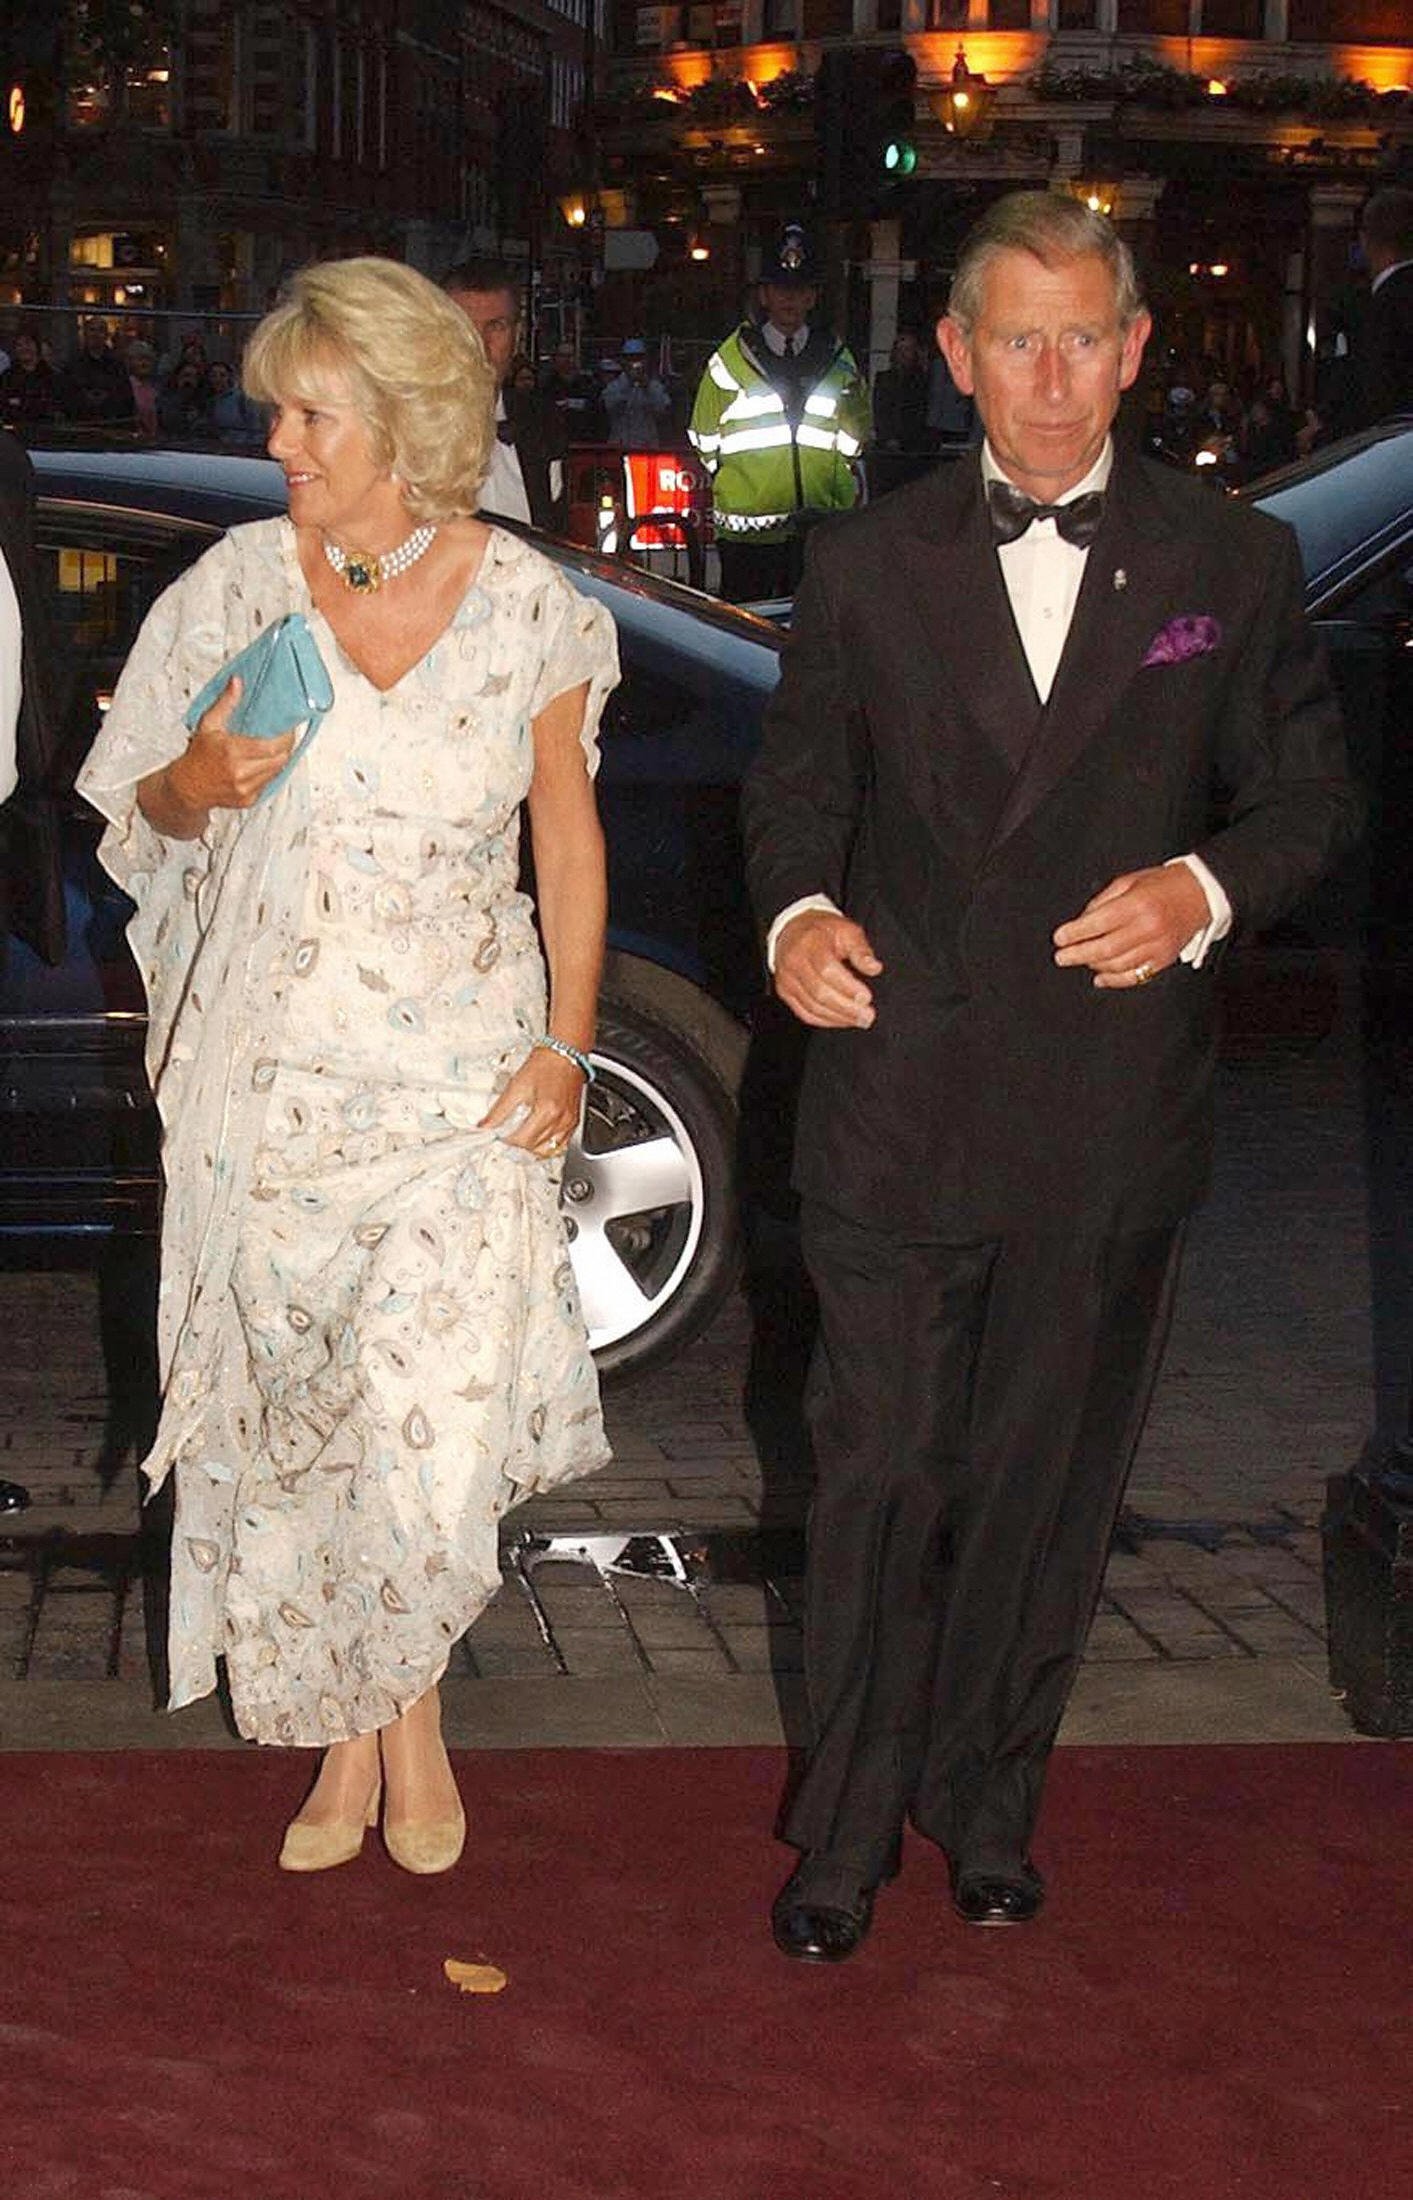 Prince Charles and Camilla Parker-Bowles at the Palace Theatre in London's West End, for the Royal Gala Charity performance on September 13, 2004 | Source: Getty Images